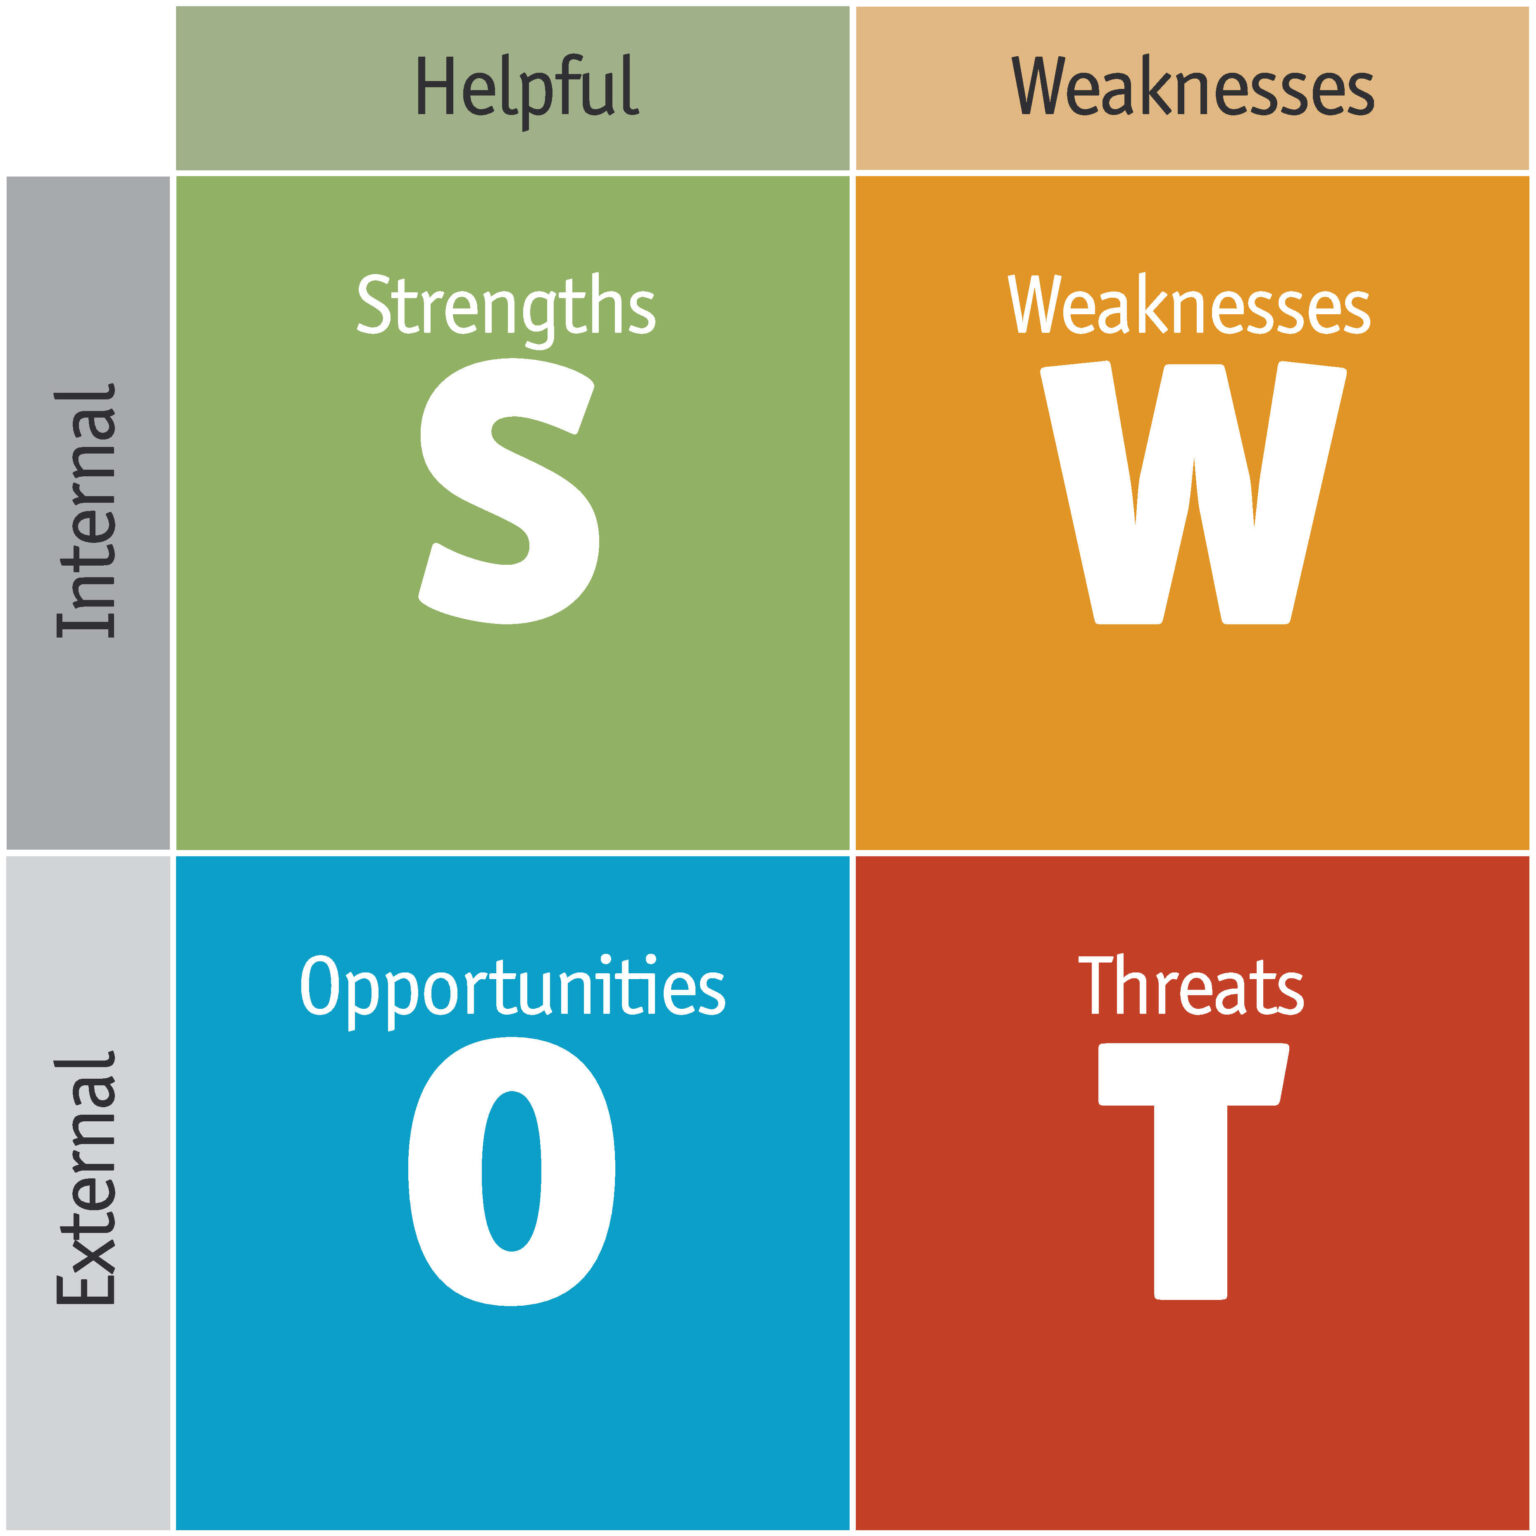 what part of business plan is swot analysis